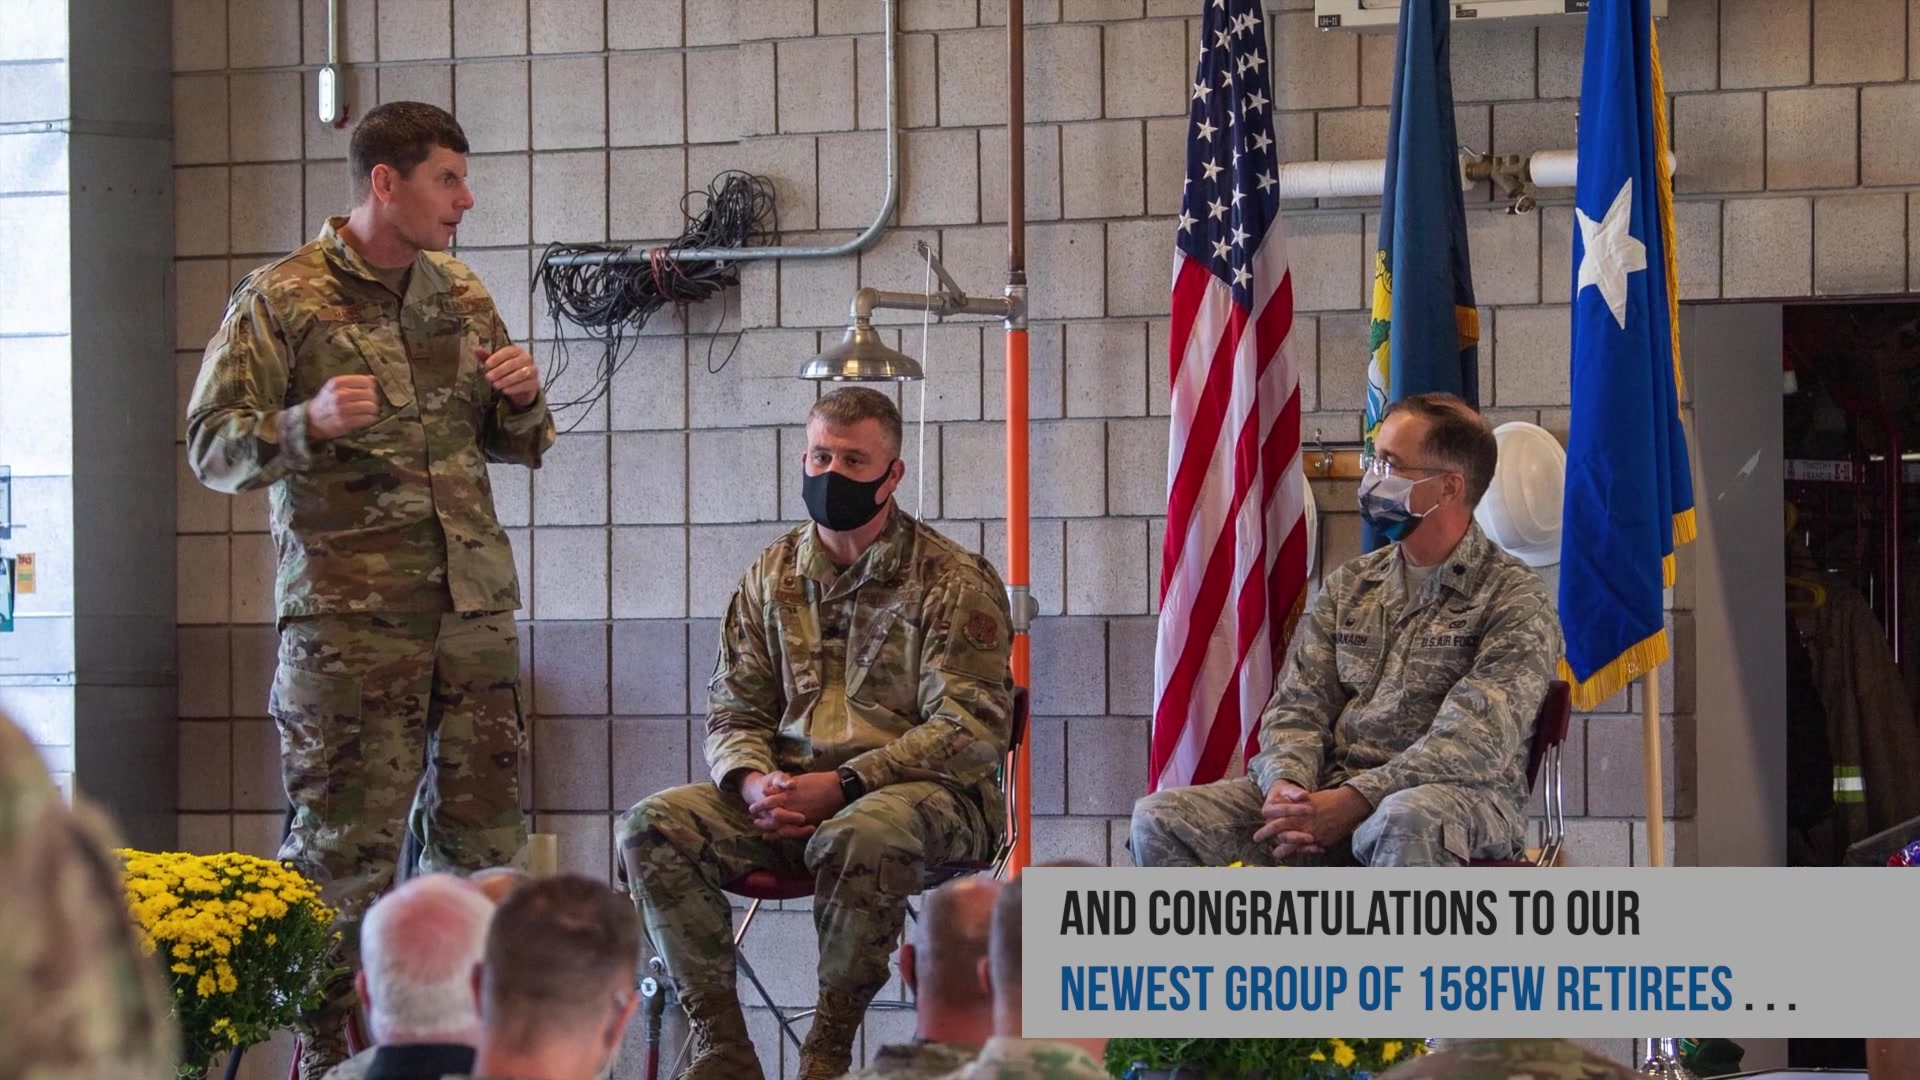 From the TAG Match to an Honorary Commanders induction ceremony, here's a glimpse into what the Green Mountain Boys were up to this past drill weekend!